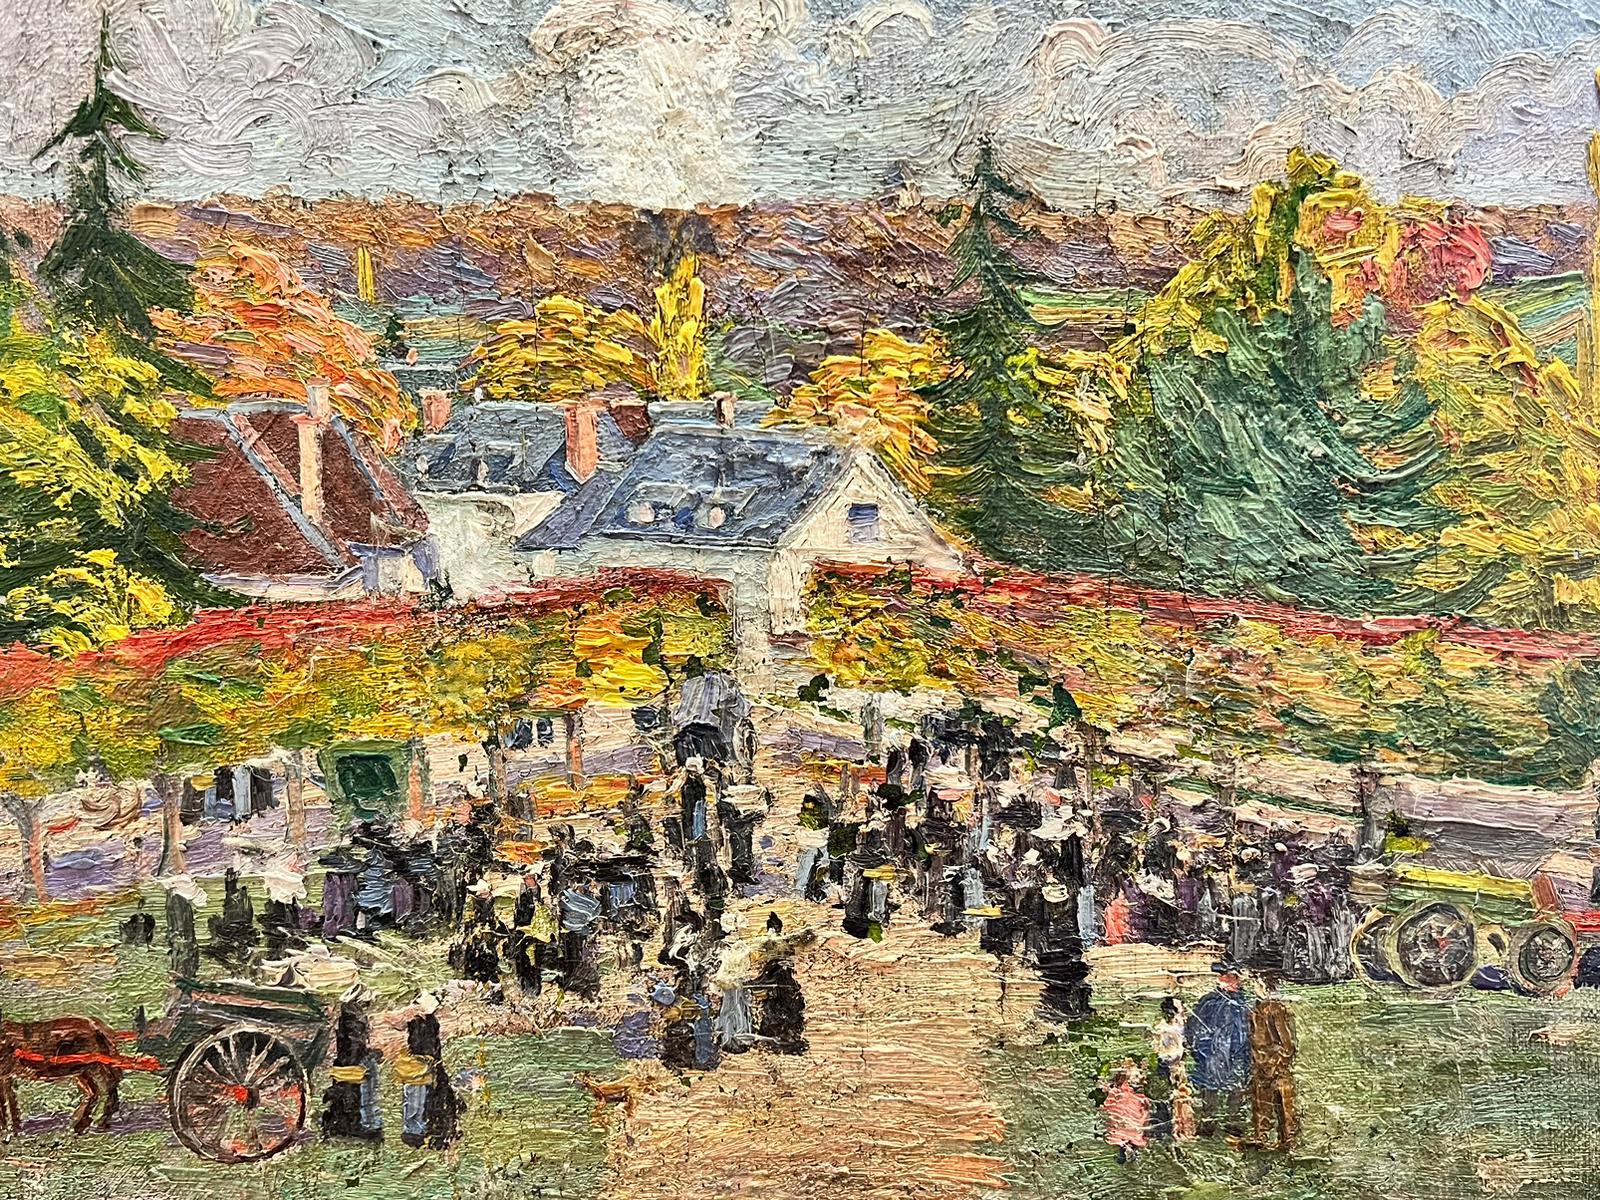 Village Fete Market Gathering 1930's French Post Impressionist Oil Painting For Sale 2